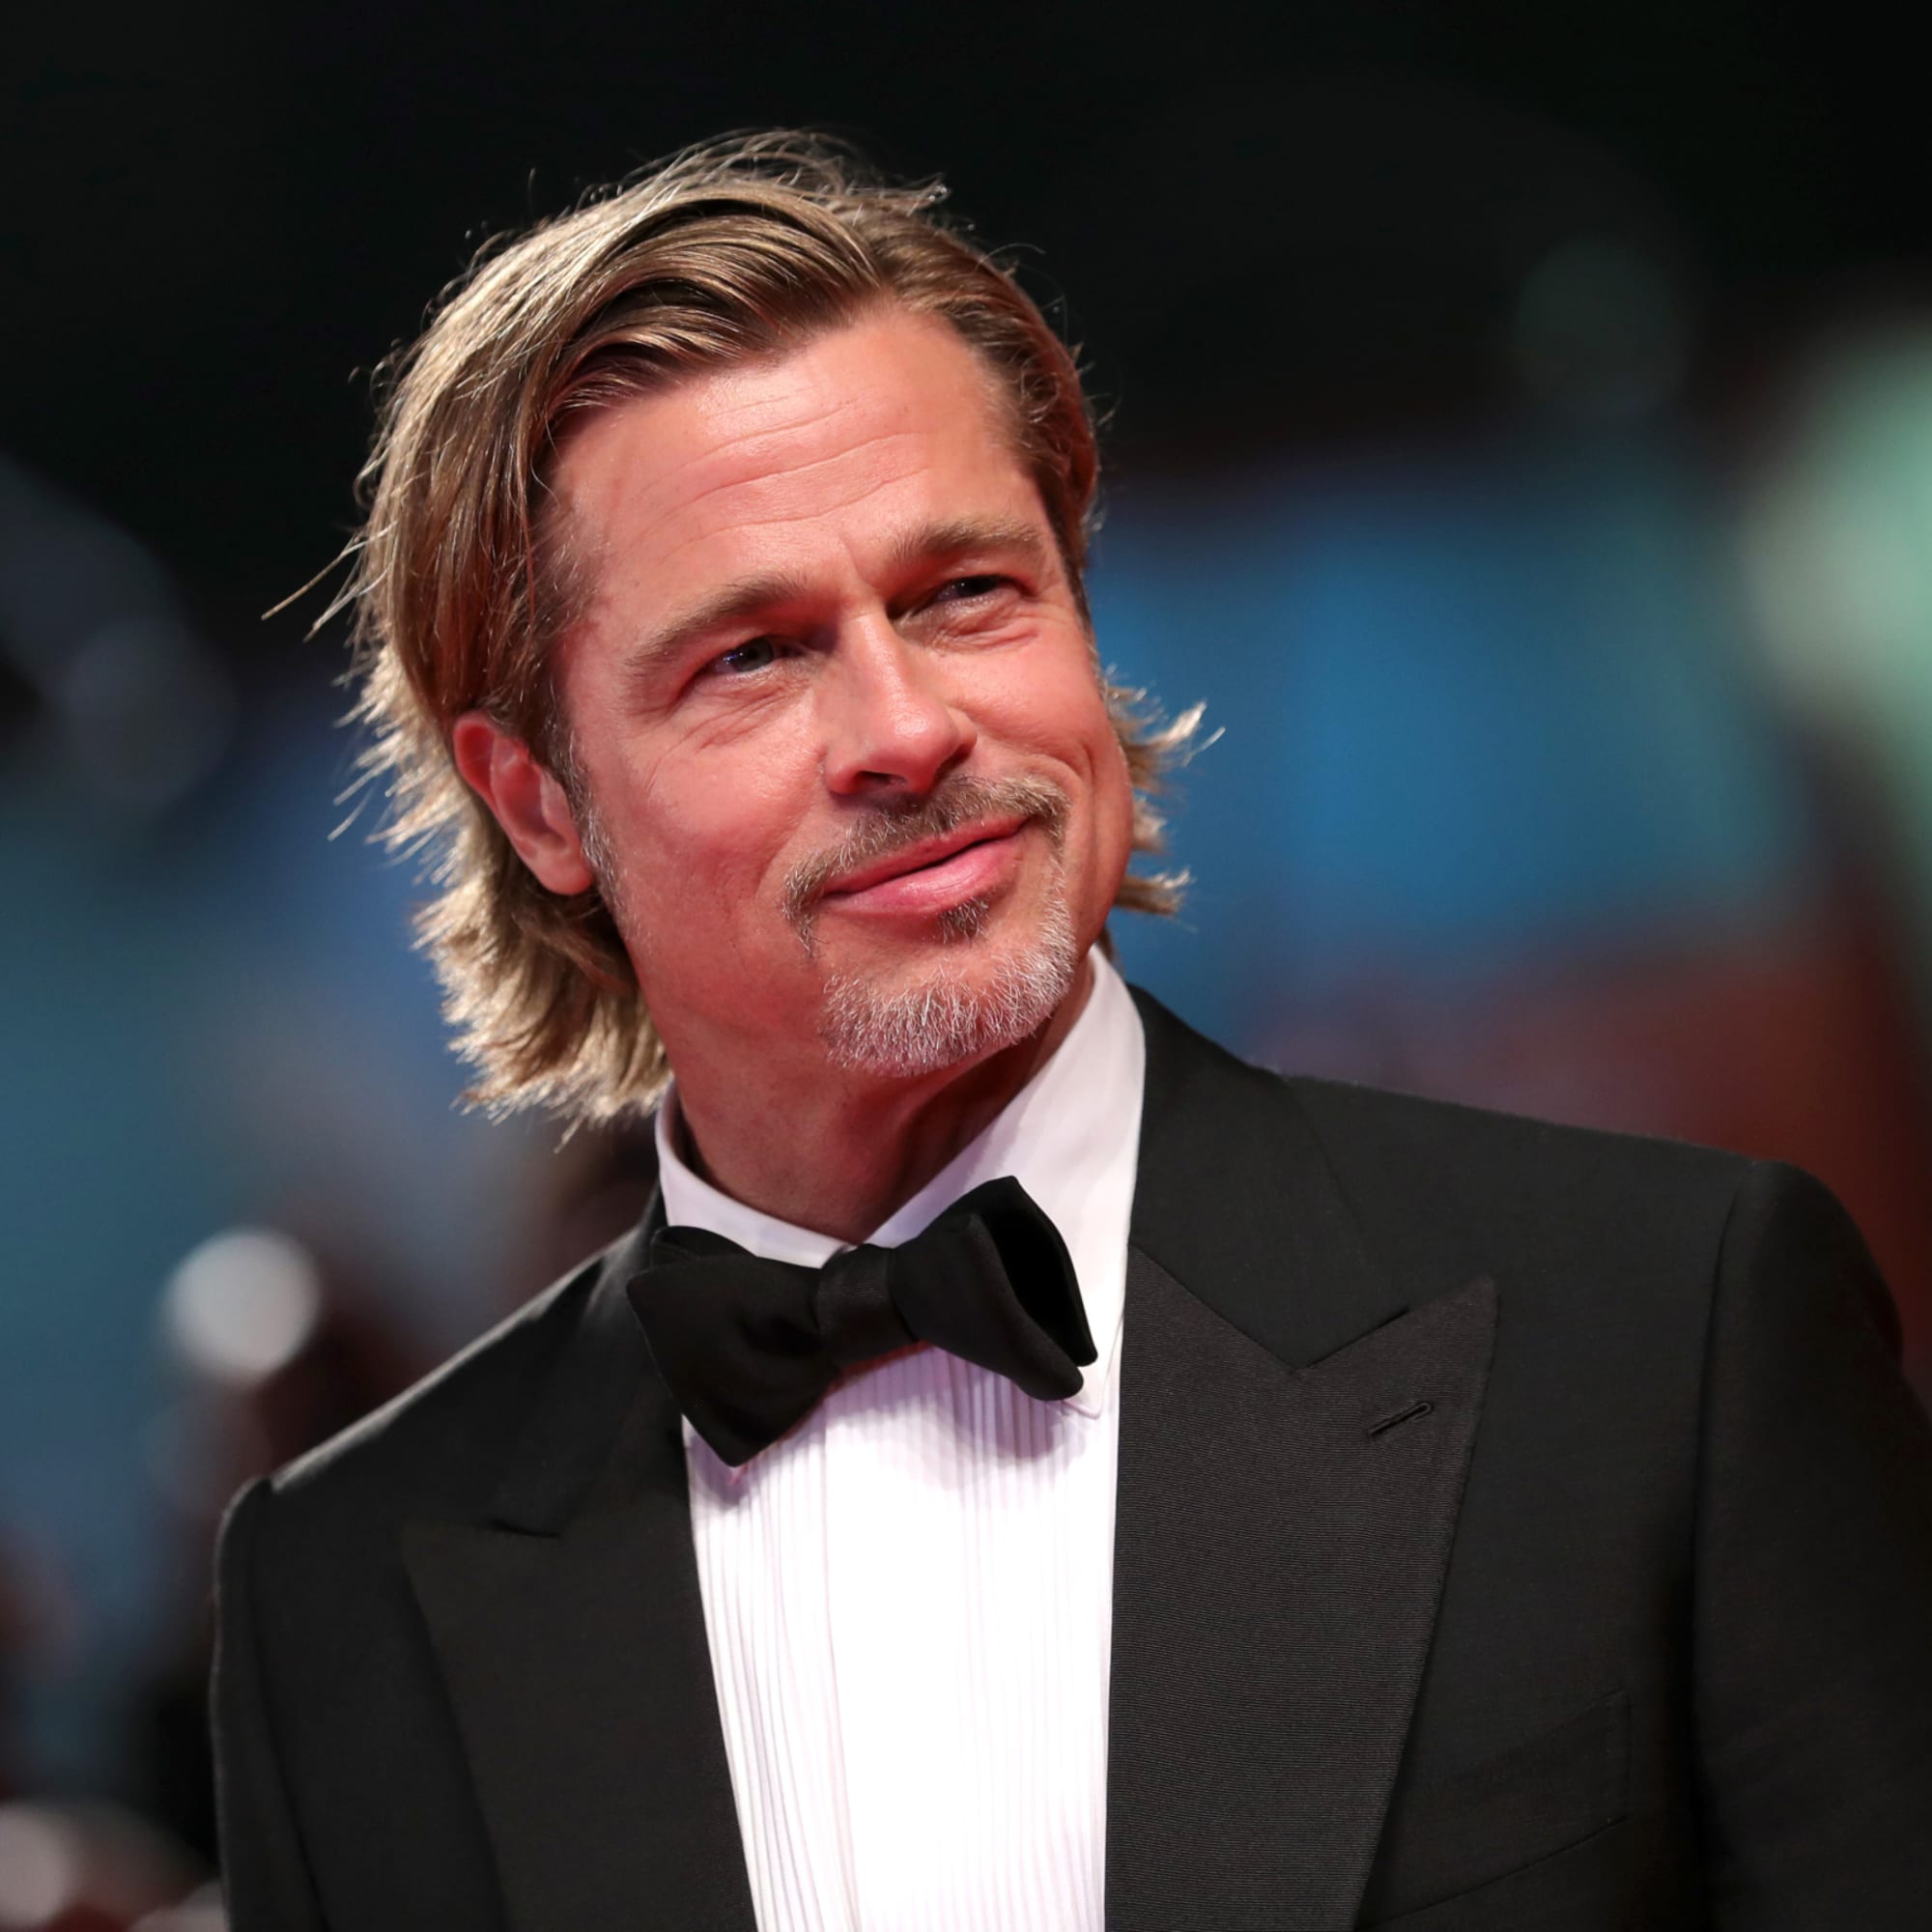 Brad Pitt Oscar Wins: How Many Academy Awards Does He Have And For What?